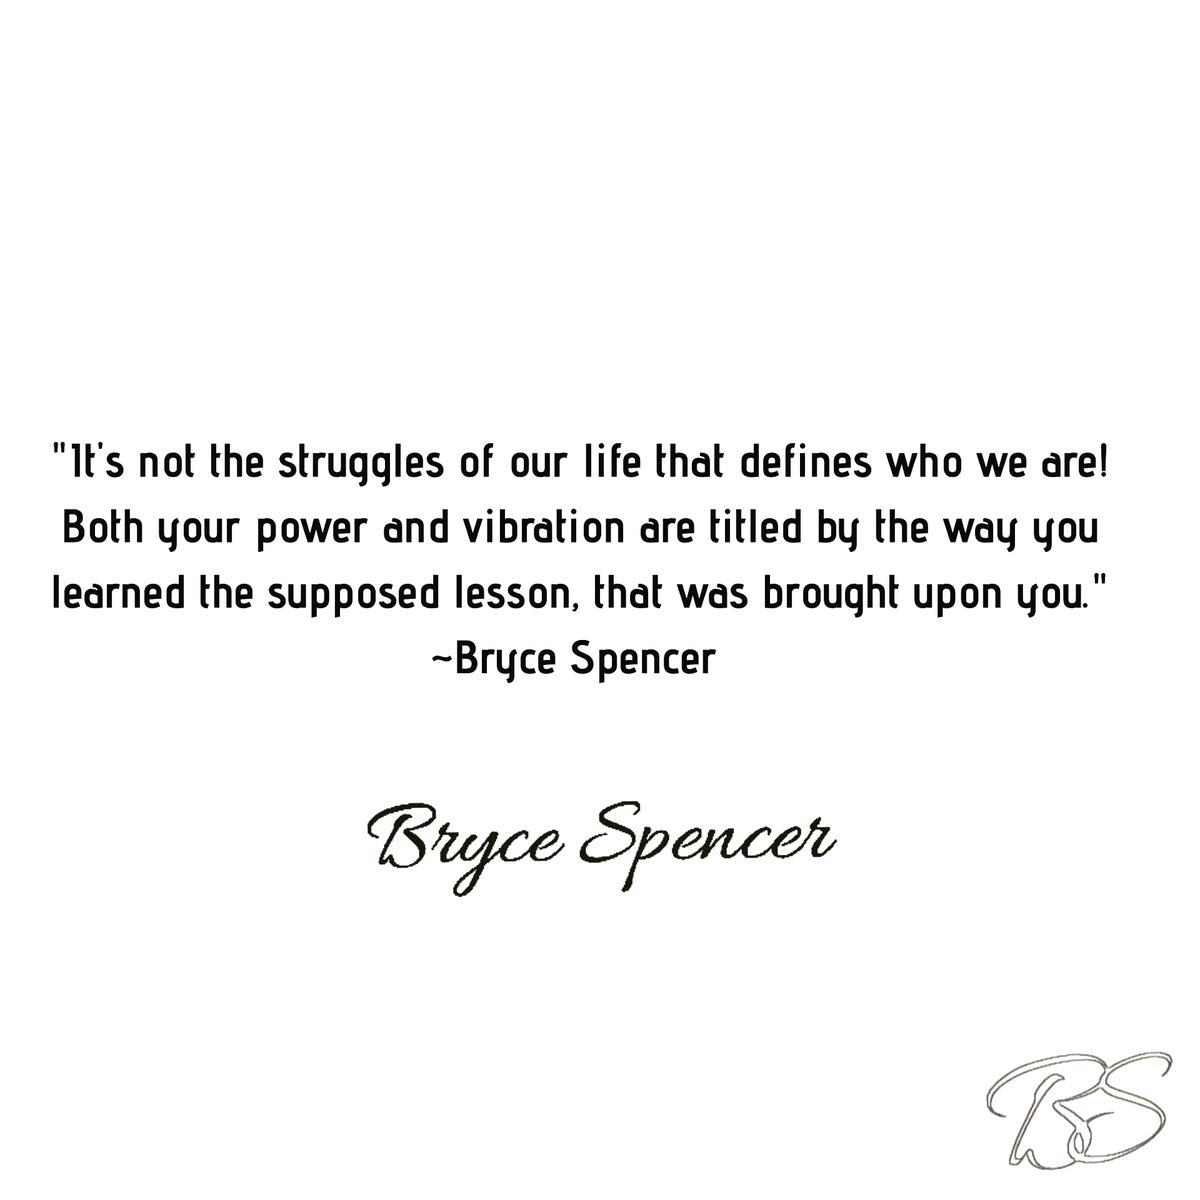 'It's not the struggles of our life that defines who we are! Both your power and vibration are titled by the way you learned the supposed lesson, that was brought upon you.' ~Bryce Spencer 
🌊💜
#BryceSpencer #MoreThanAName #BrandOfDestiny #influentialSpeaker #OriginalQuote